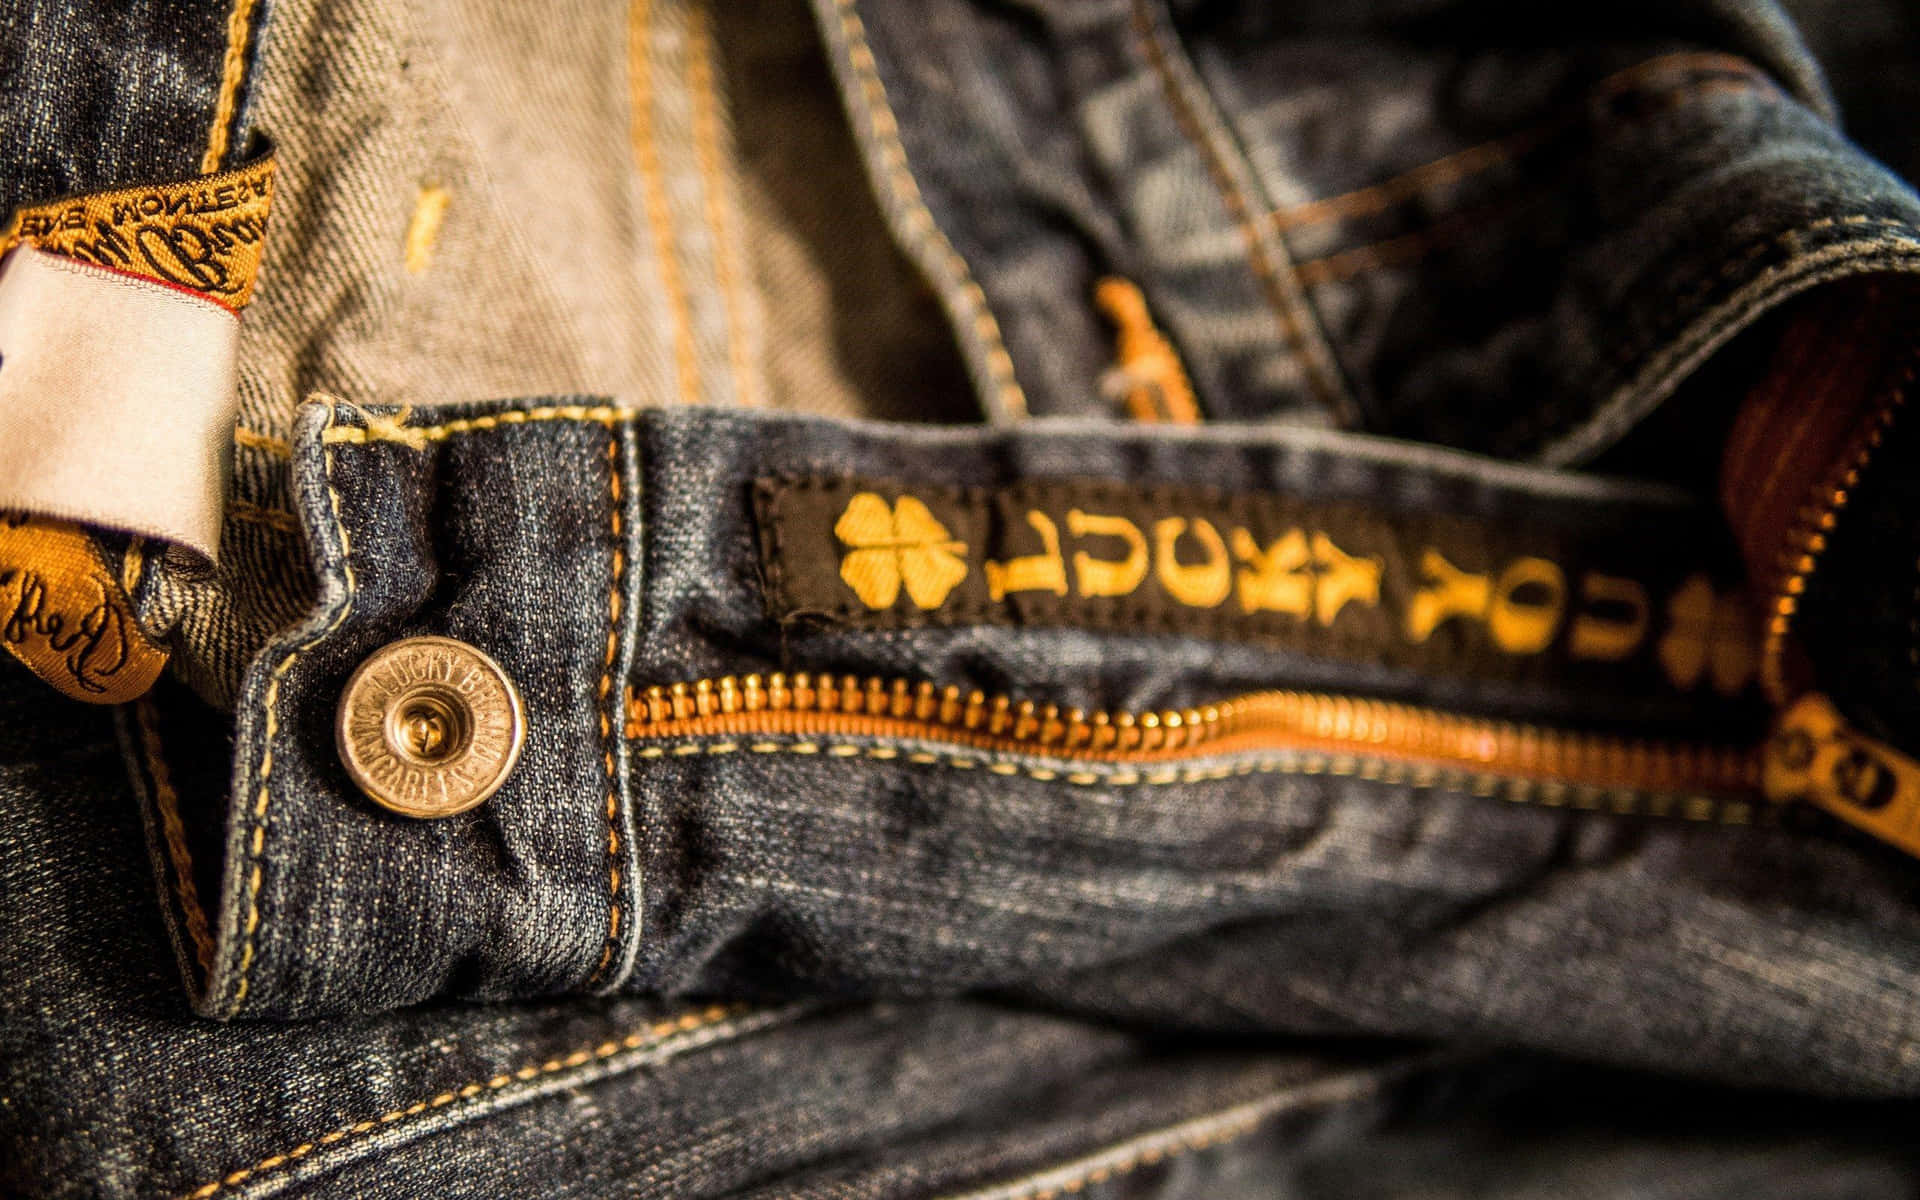 A Close Up Of A Pair Of Jeans With A Zipper